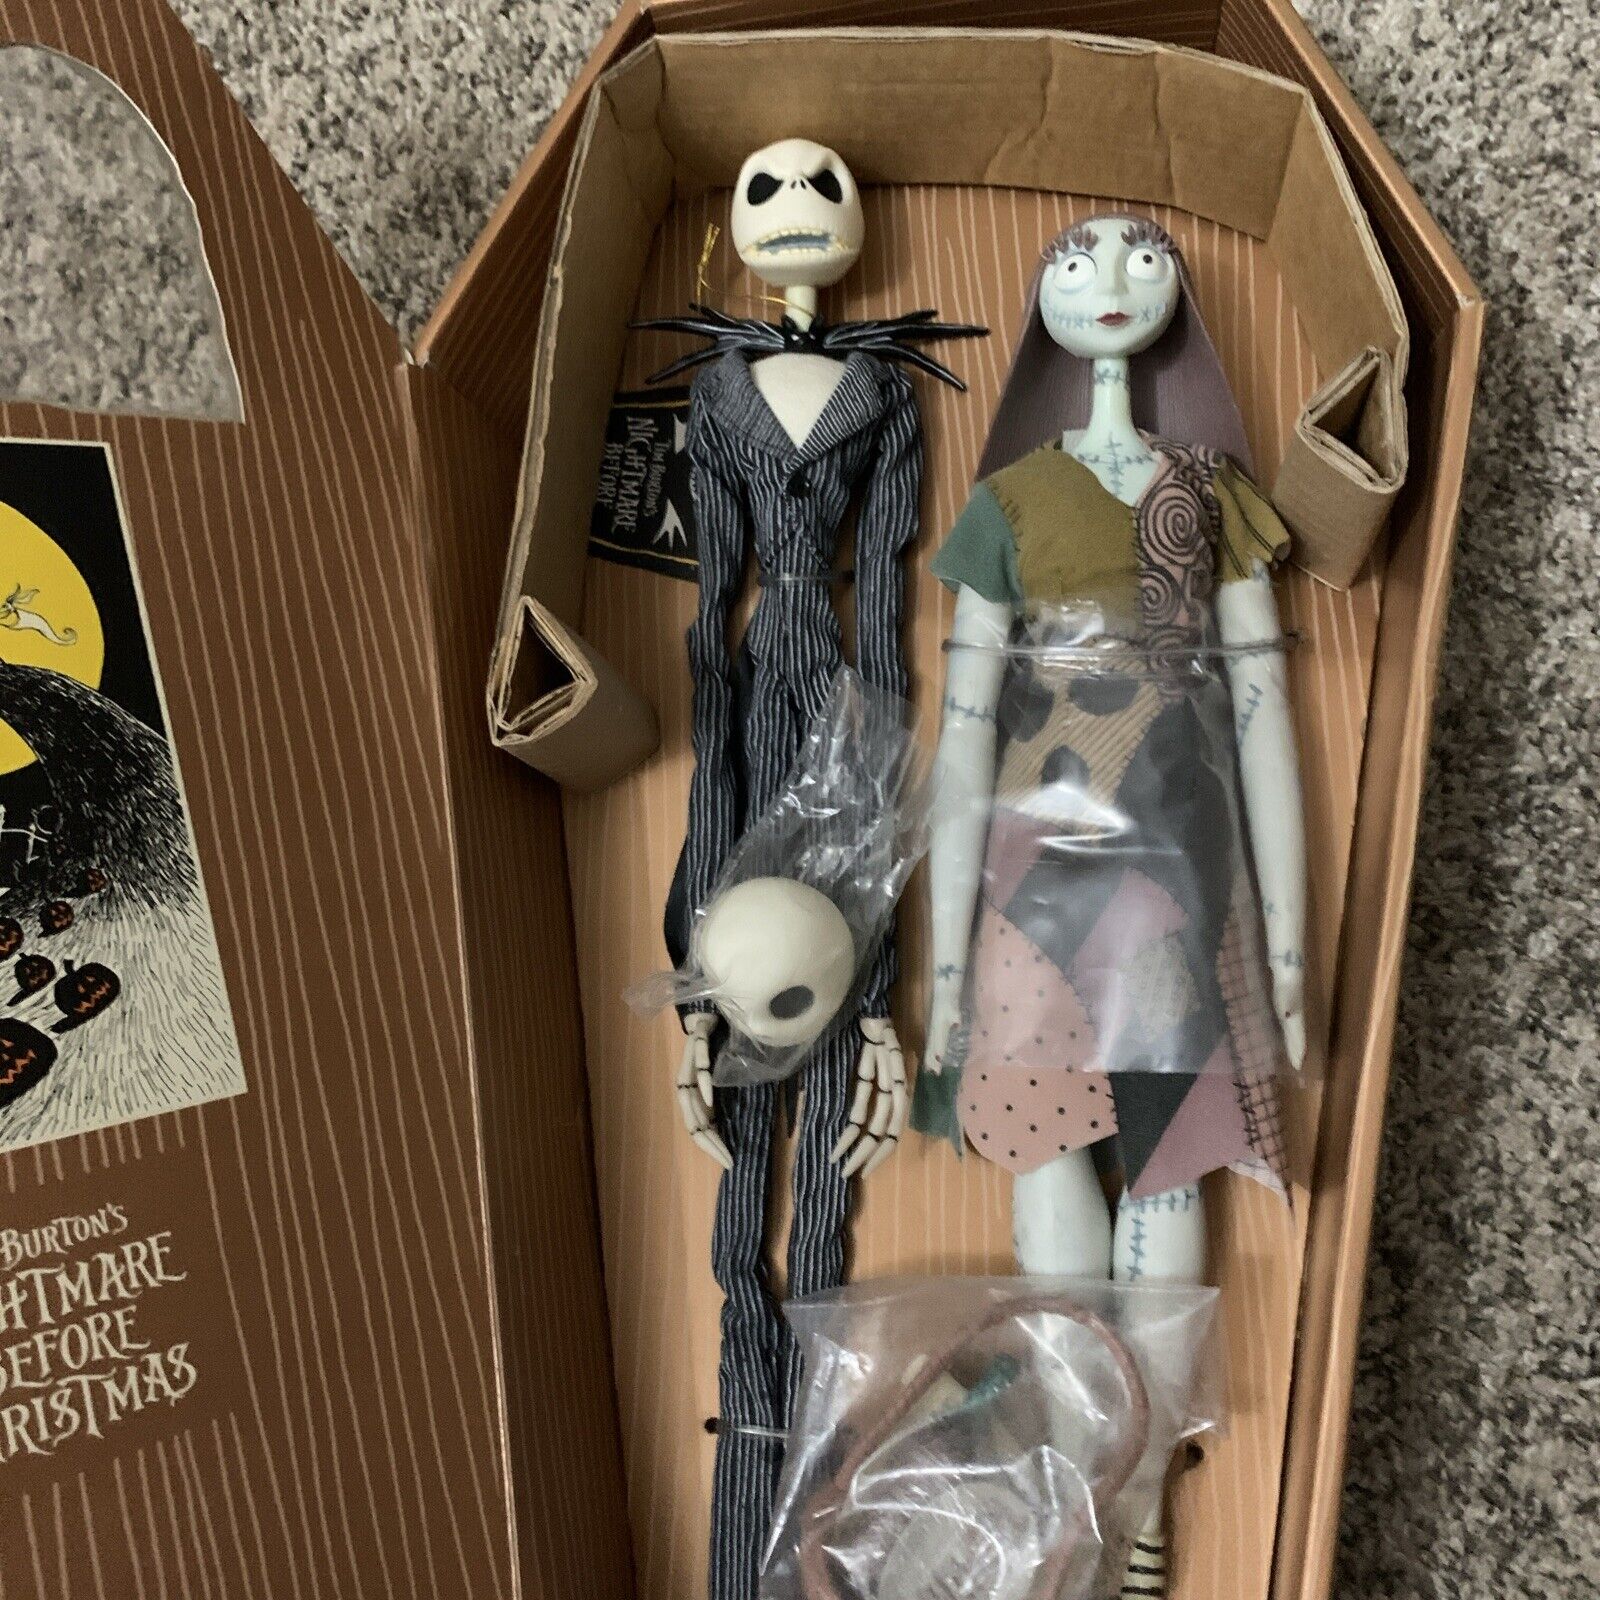 1998 Nightmare Before Christmas Jun Planning Dolls Jack & Sally -Limited To 6000